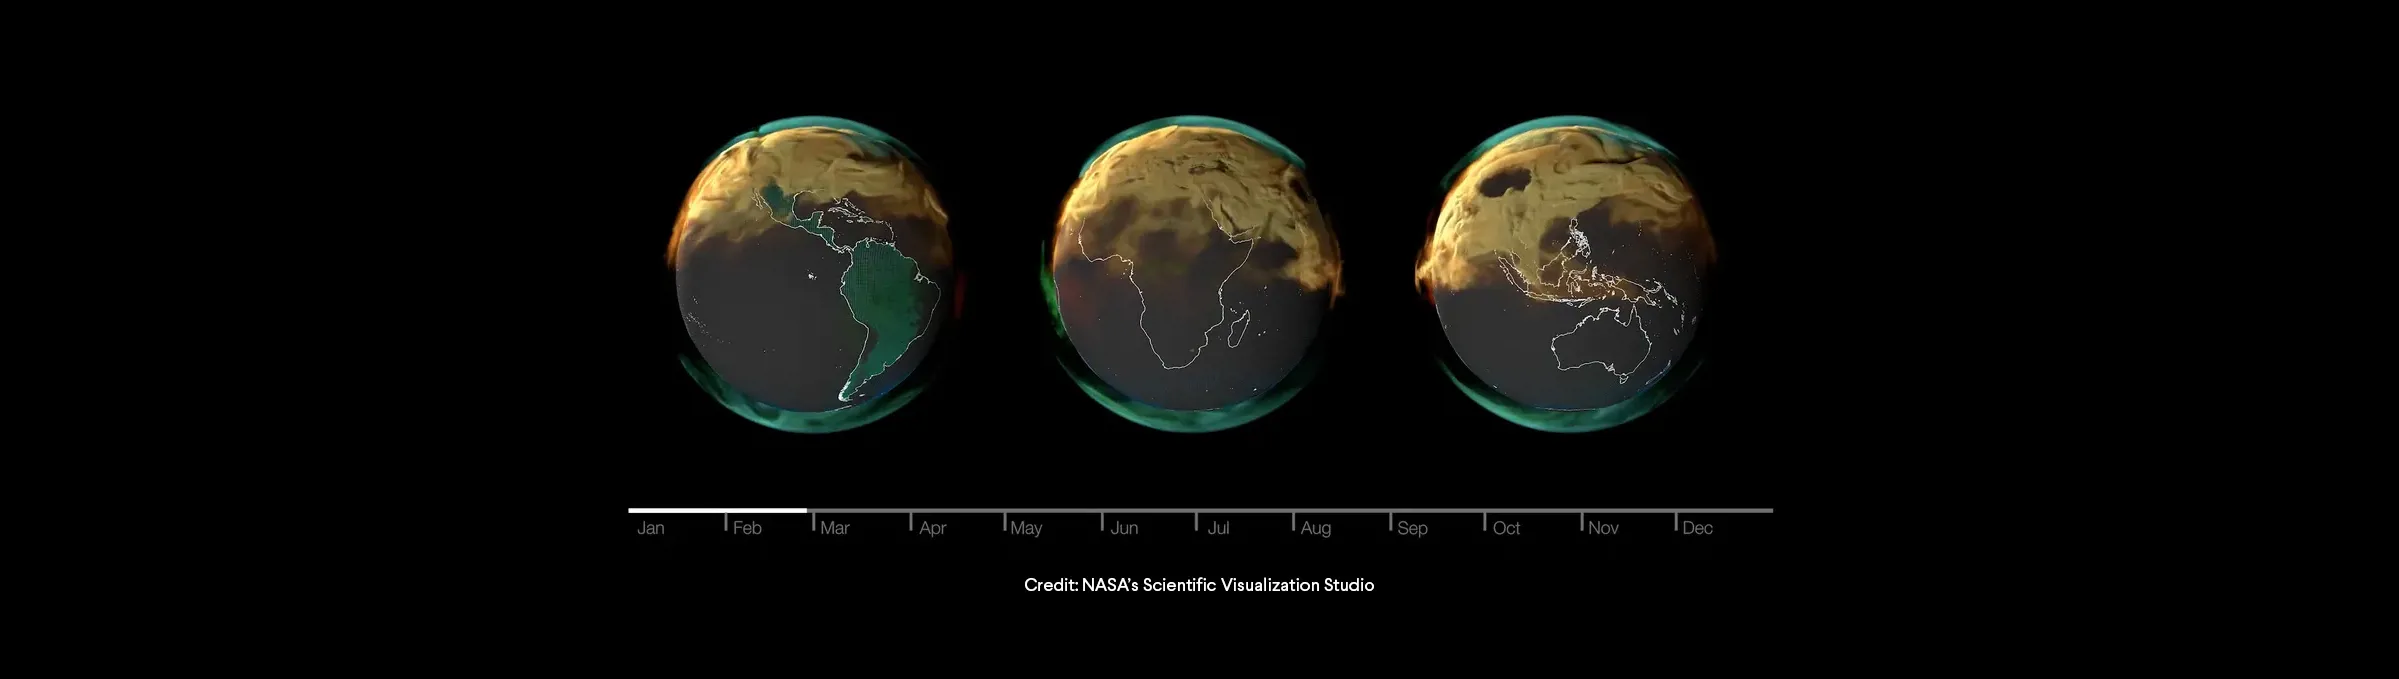 Striking NASA videos reveal alarming buildup of CO2 emissions in our atmosphere